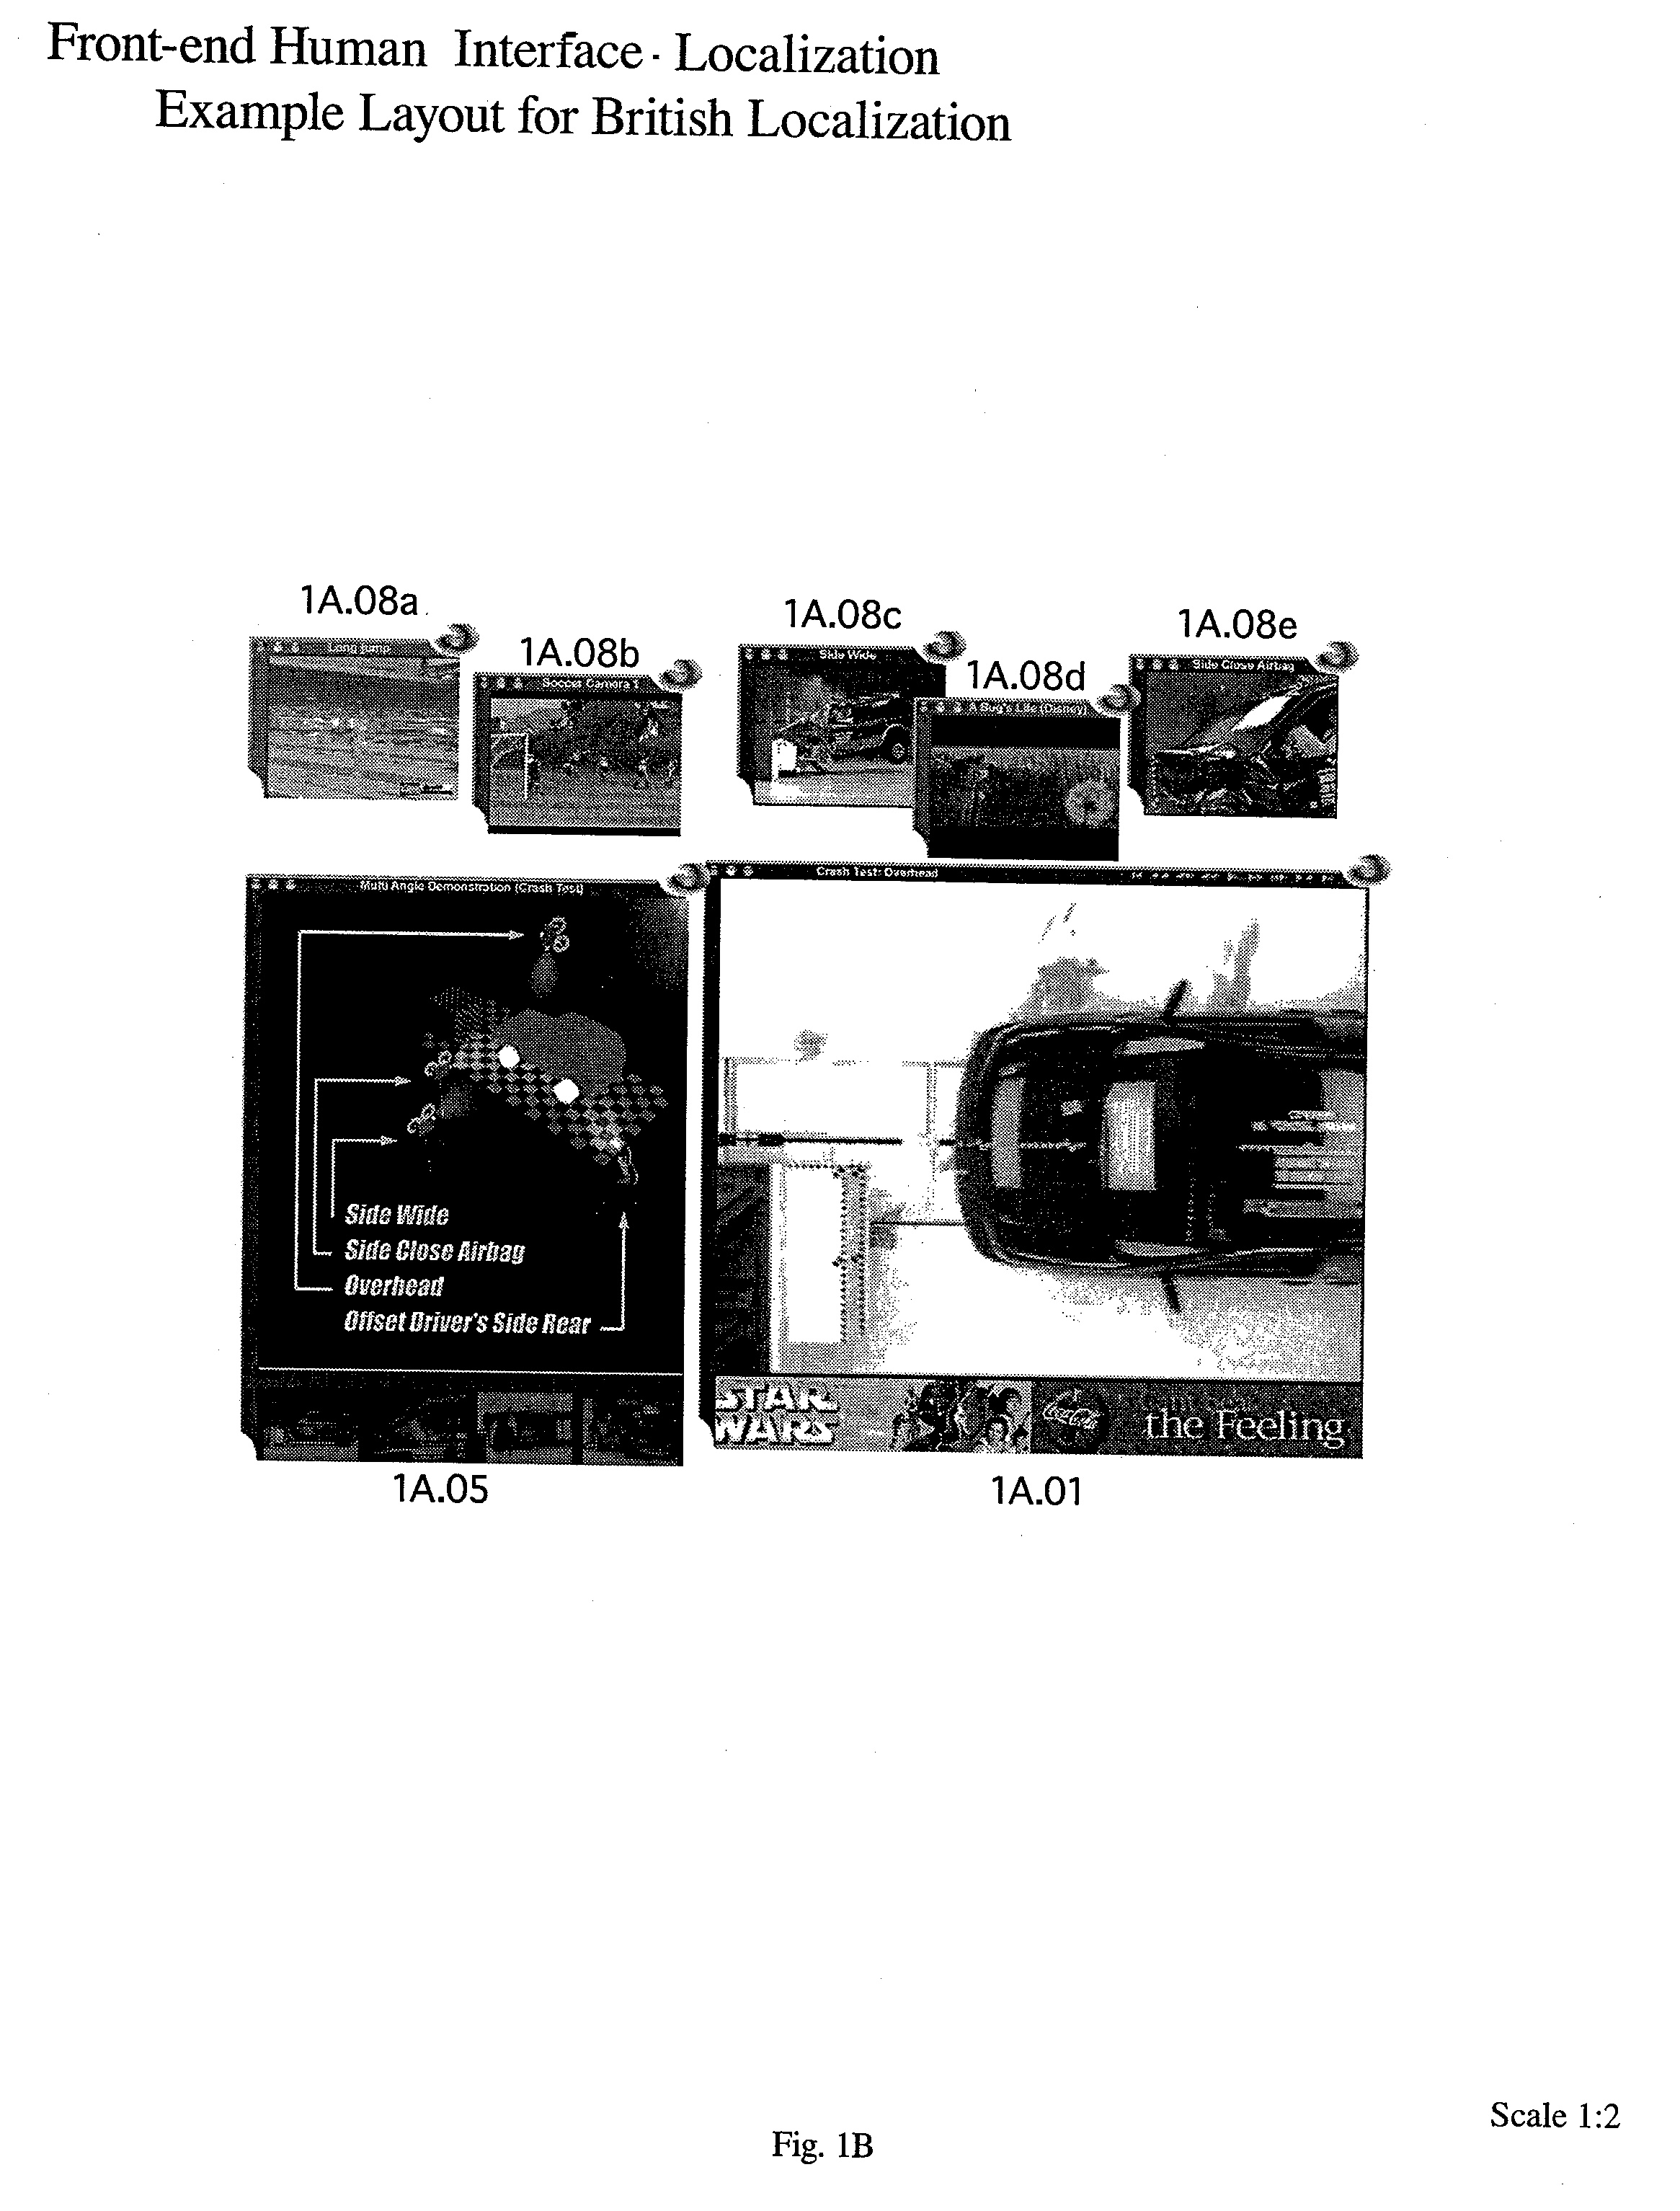 Consumer access systems and methods for providing same